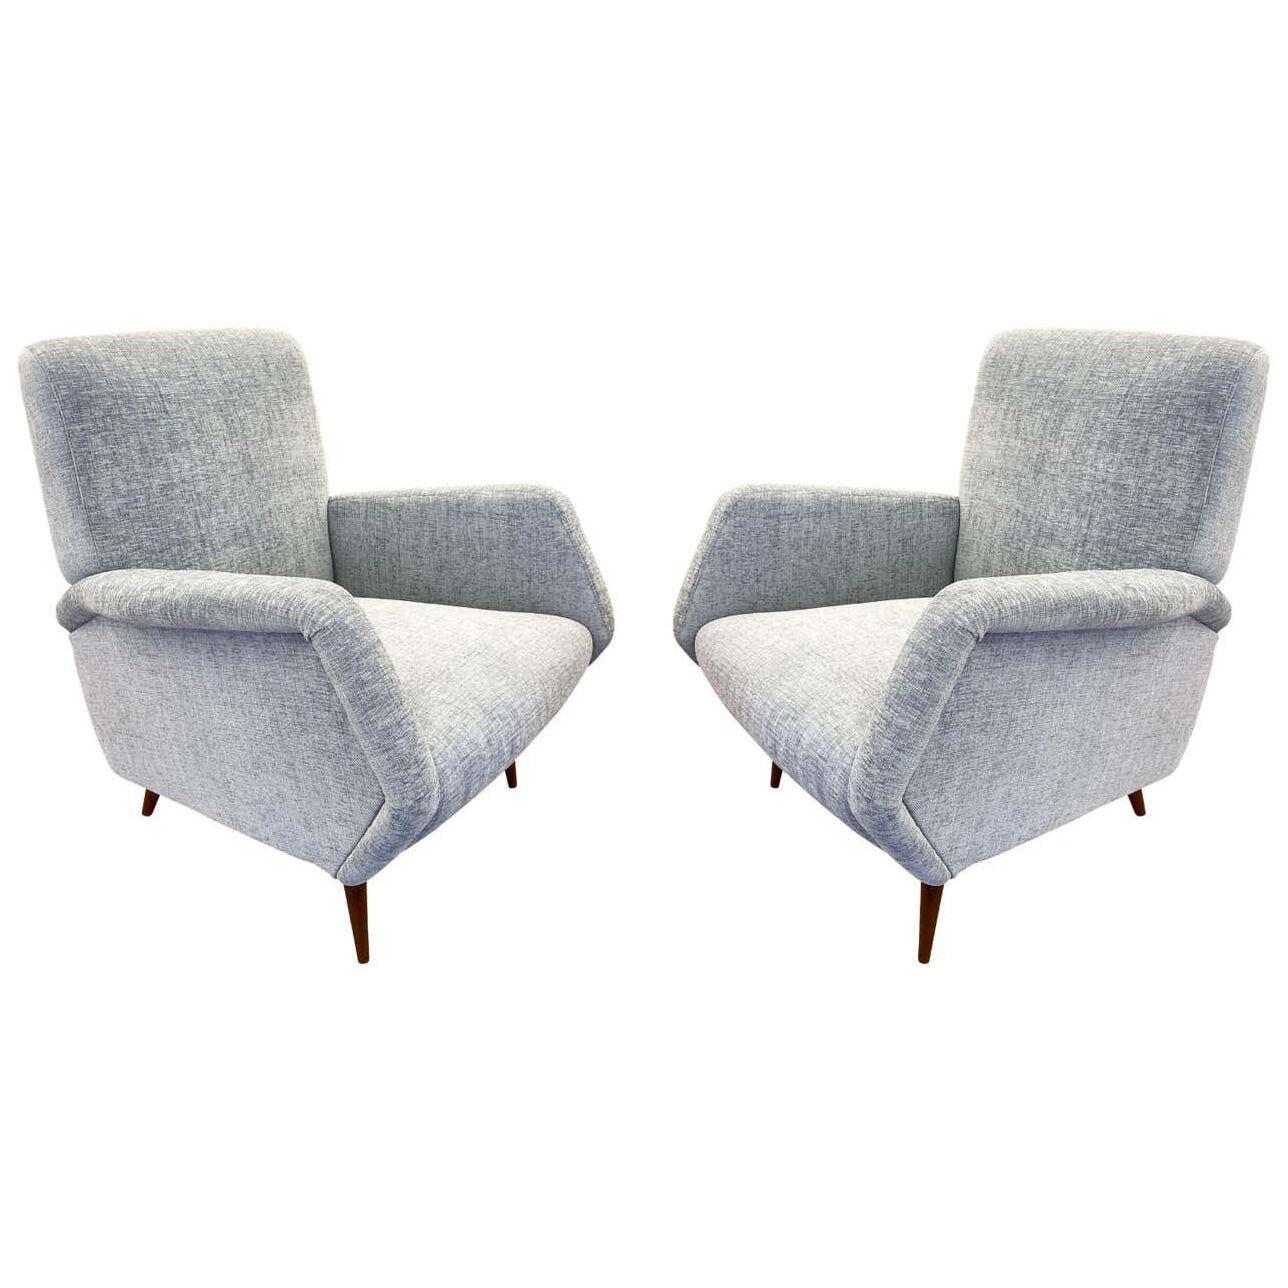 Gio Ponti Armchairs, Model 803, for Cassina